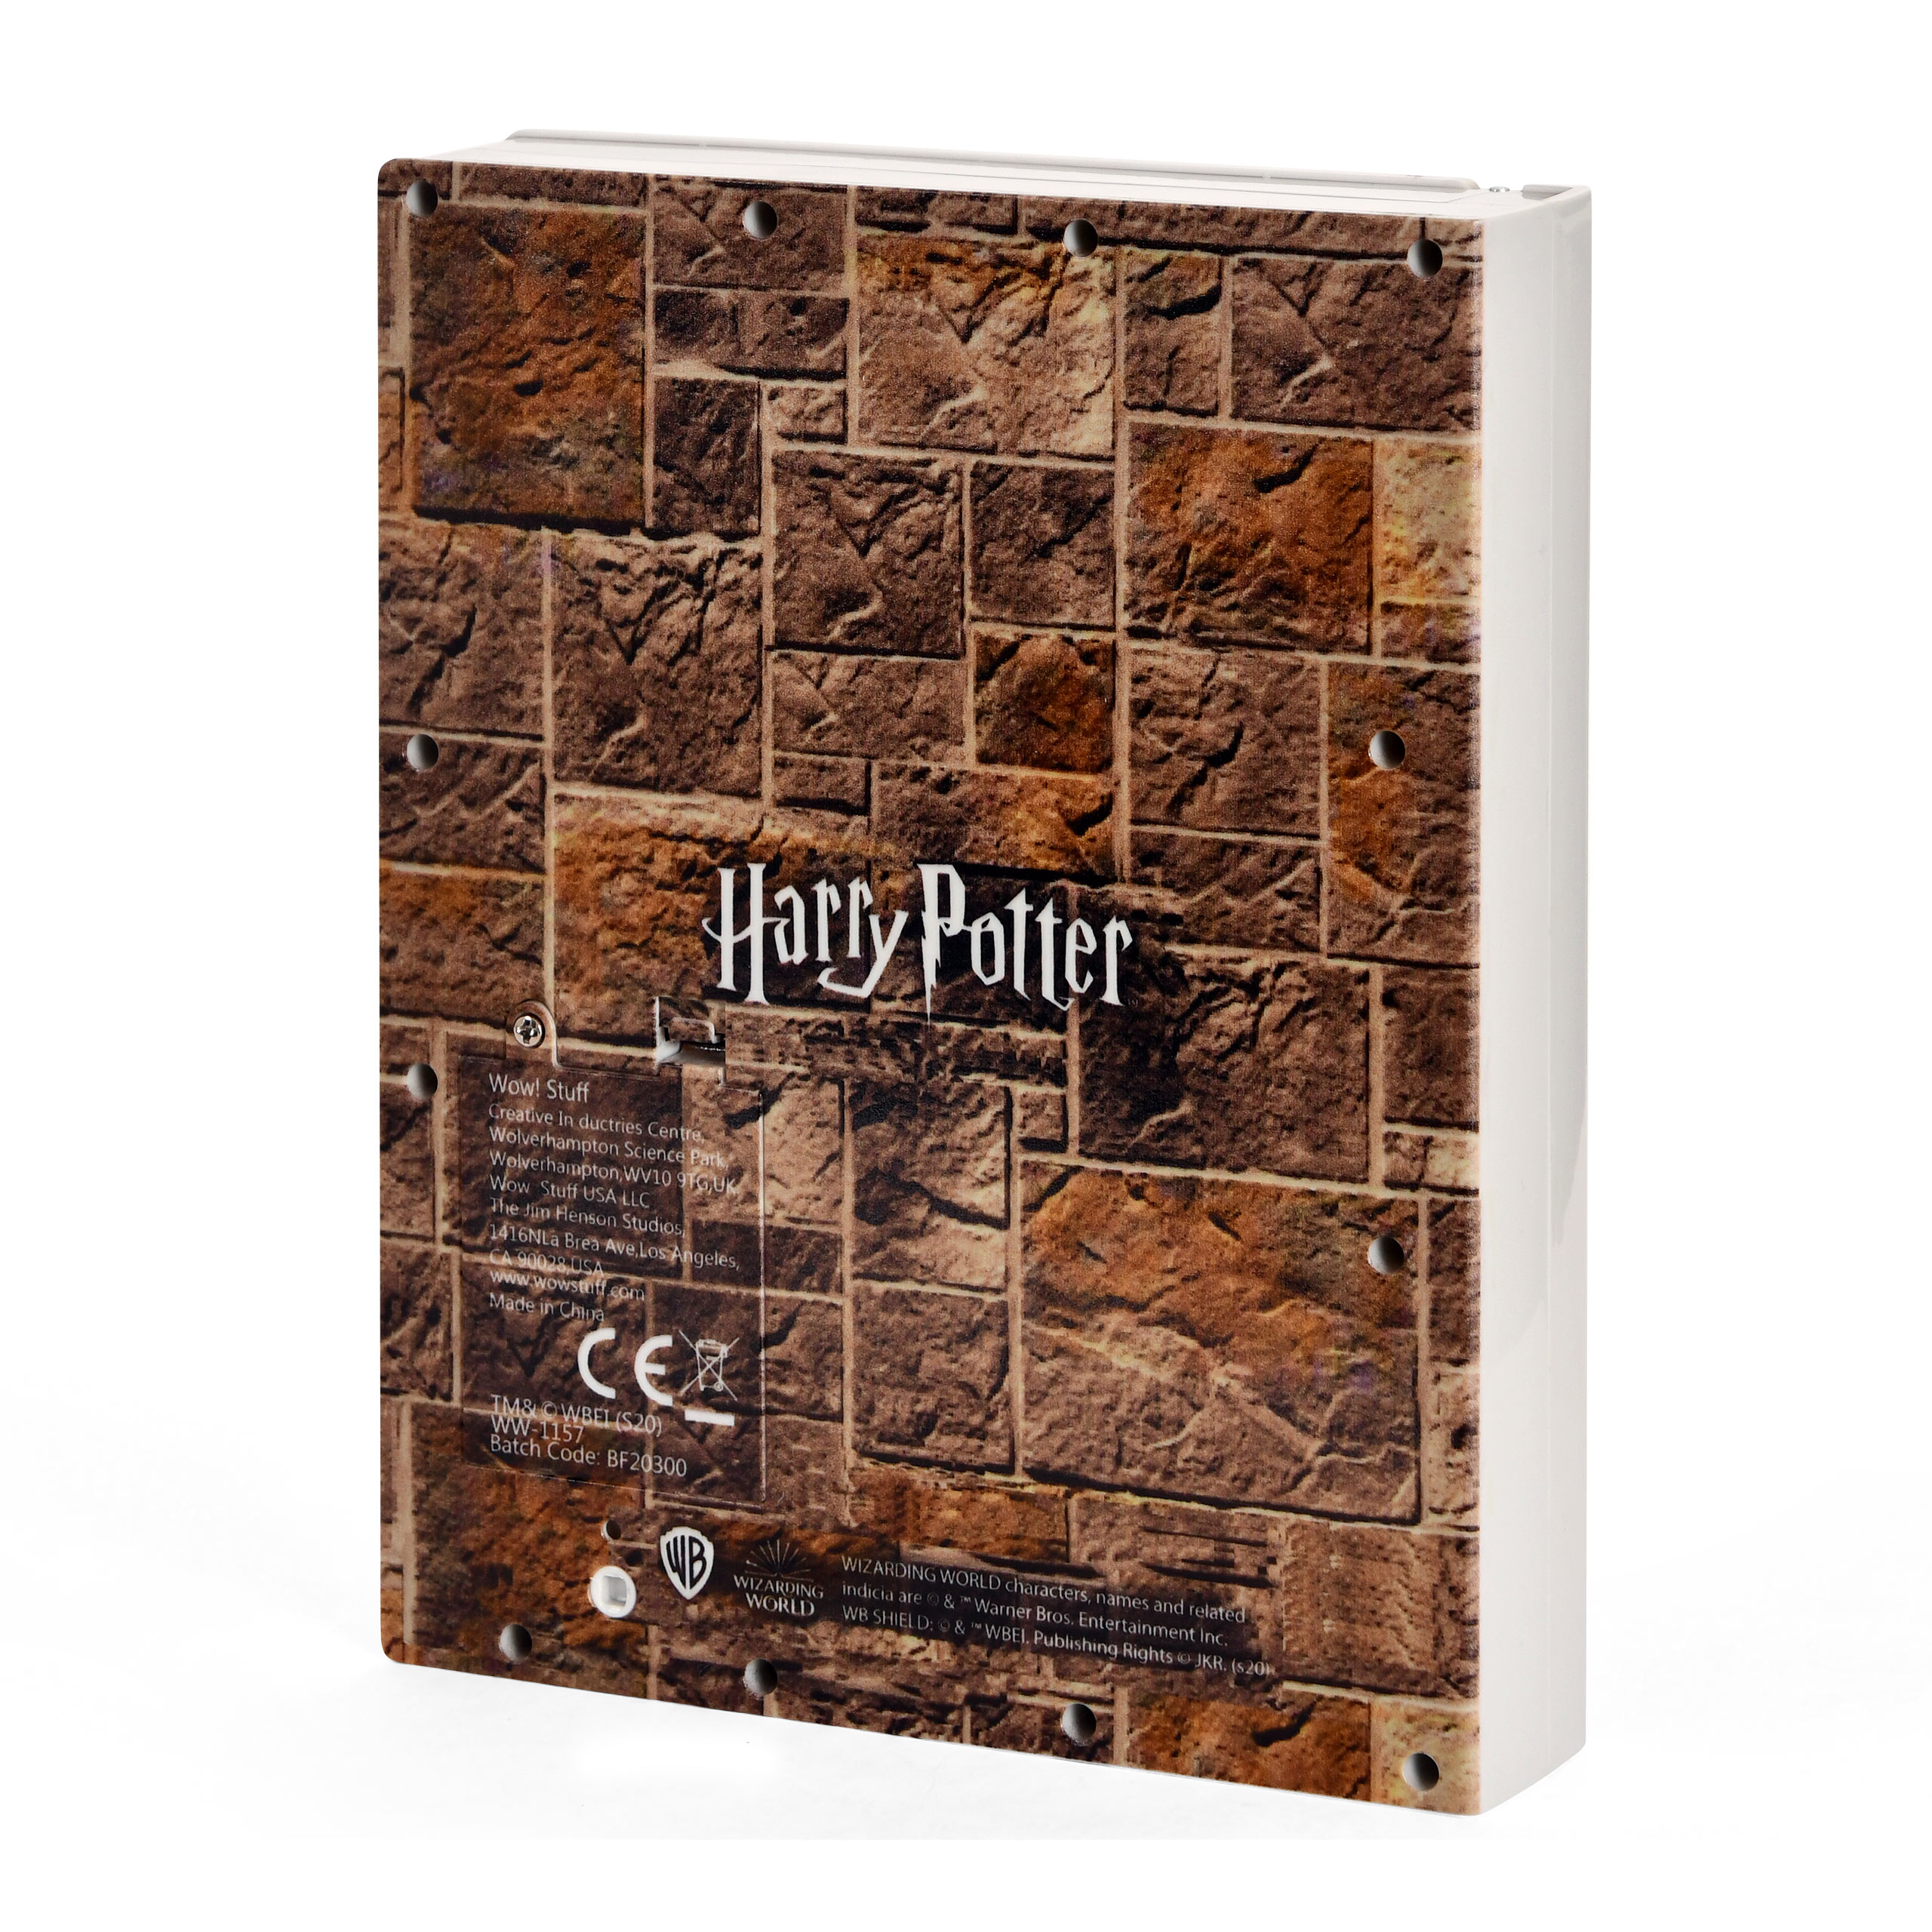 Harry Potter - Fat Lady Box with Notepad and Password